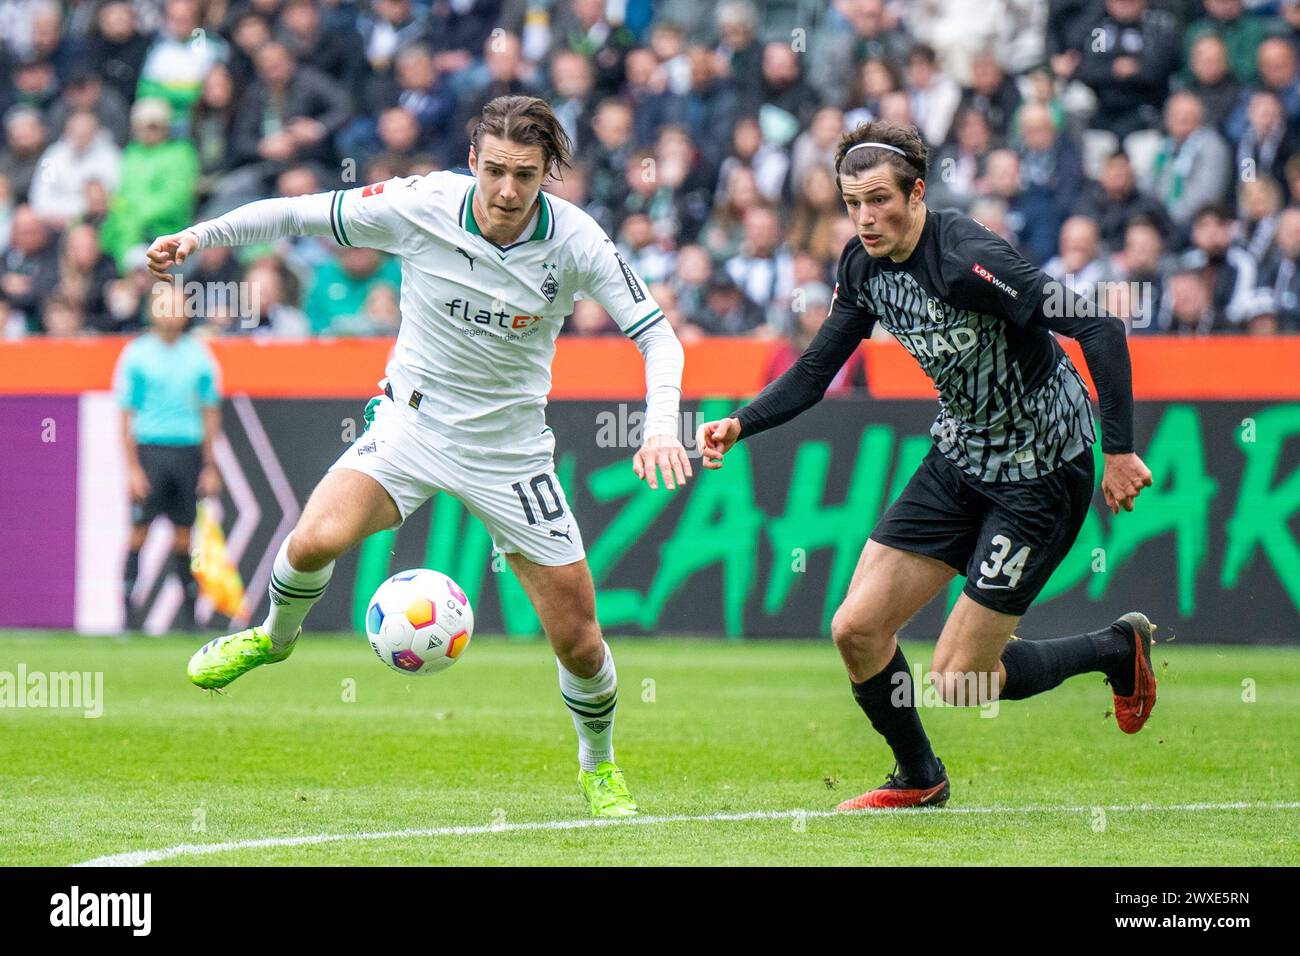 30 March 2024, North Rhine-Westphalia, Mönchengladbach: Soccer: Bundesliga, Bor. Mönchengladbach - SC Freiburg, Matchday 27, Stadion im Borussia-Park: Gladbach's Florian Neuhaus (l) and Freiburg's Merlin Röhl fight for the ball. Photo: David Inderlied/dpa - IMPORTANT NOTE: In accordance with the regulations of the DFL German Football League and the DFB German Football Association, it is prohibited to utilize or have utilized photographs taken in the stadium and/or of the match in the form of sequential images and/or video-like photo series. Stock Photo